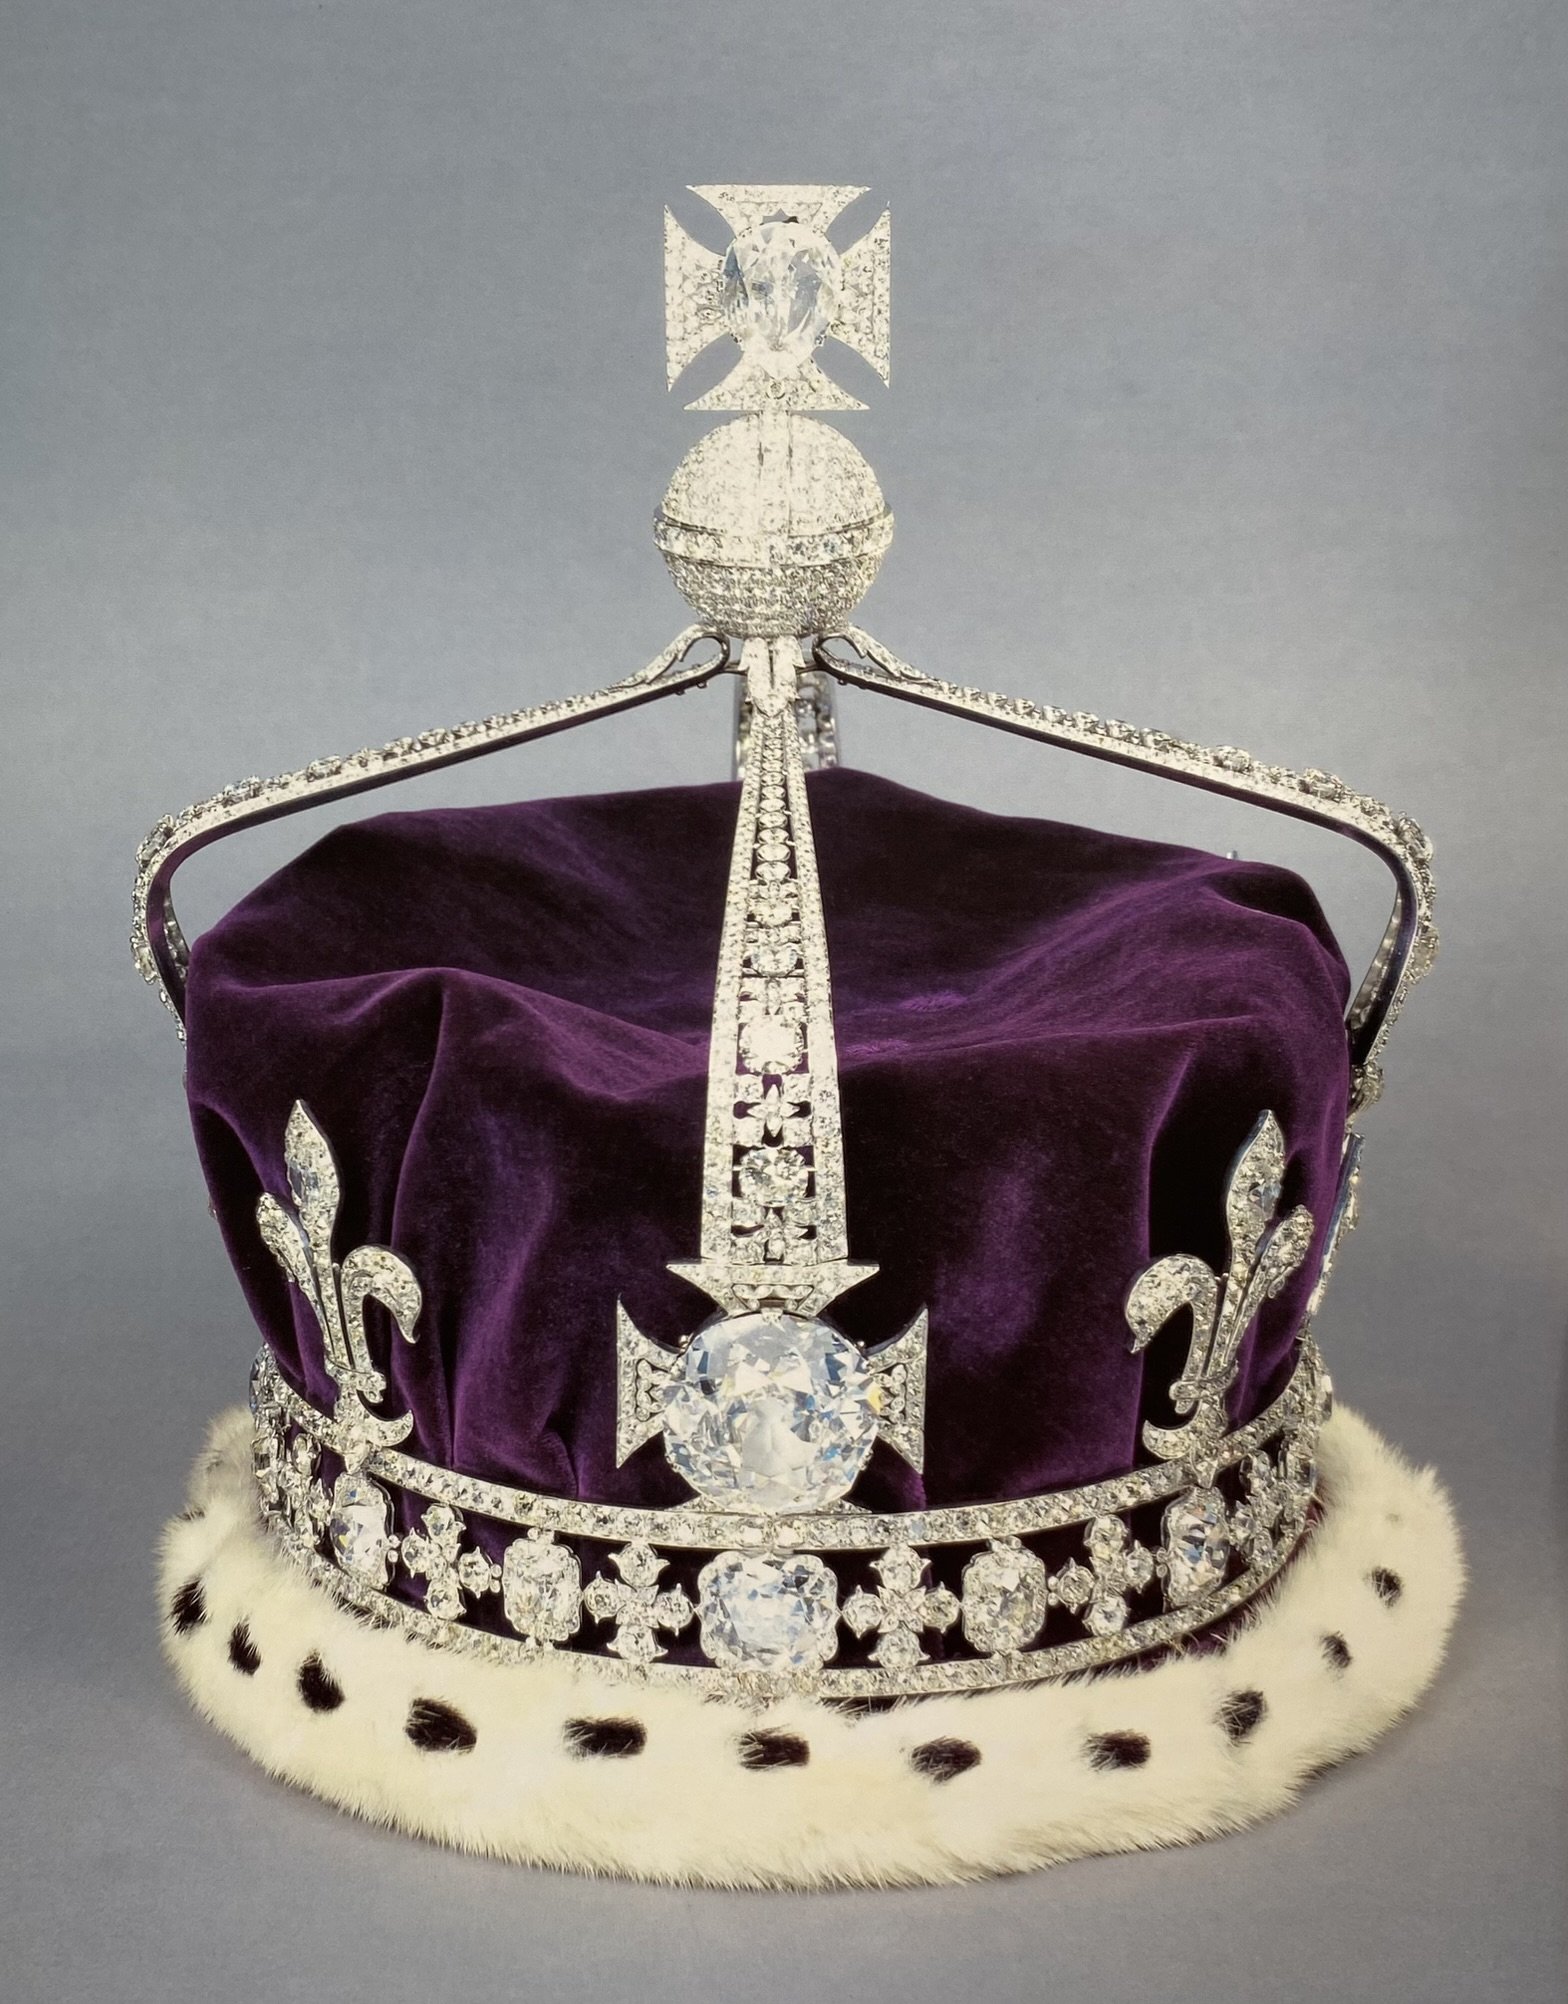 The Queen Consort’s Crown - set with the legendary Koh-i-Noor diamond amid 2,800 other diamonds